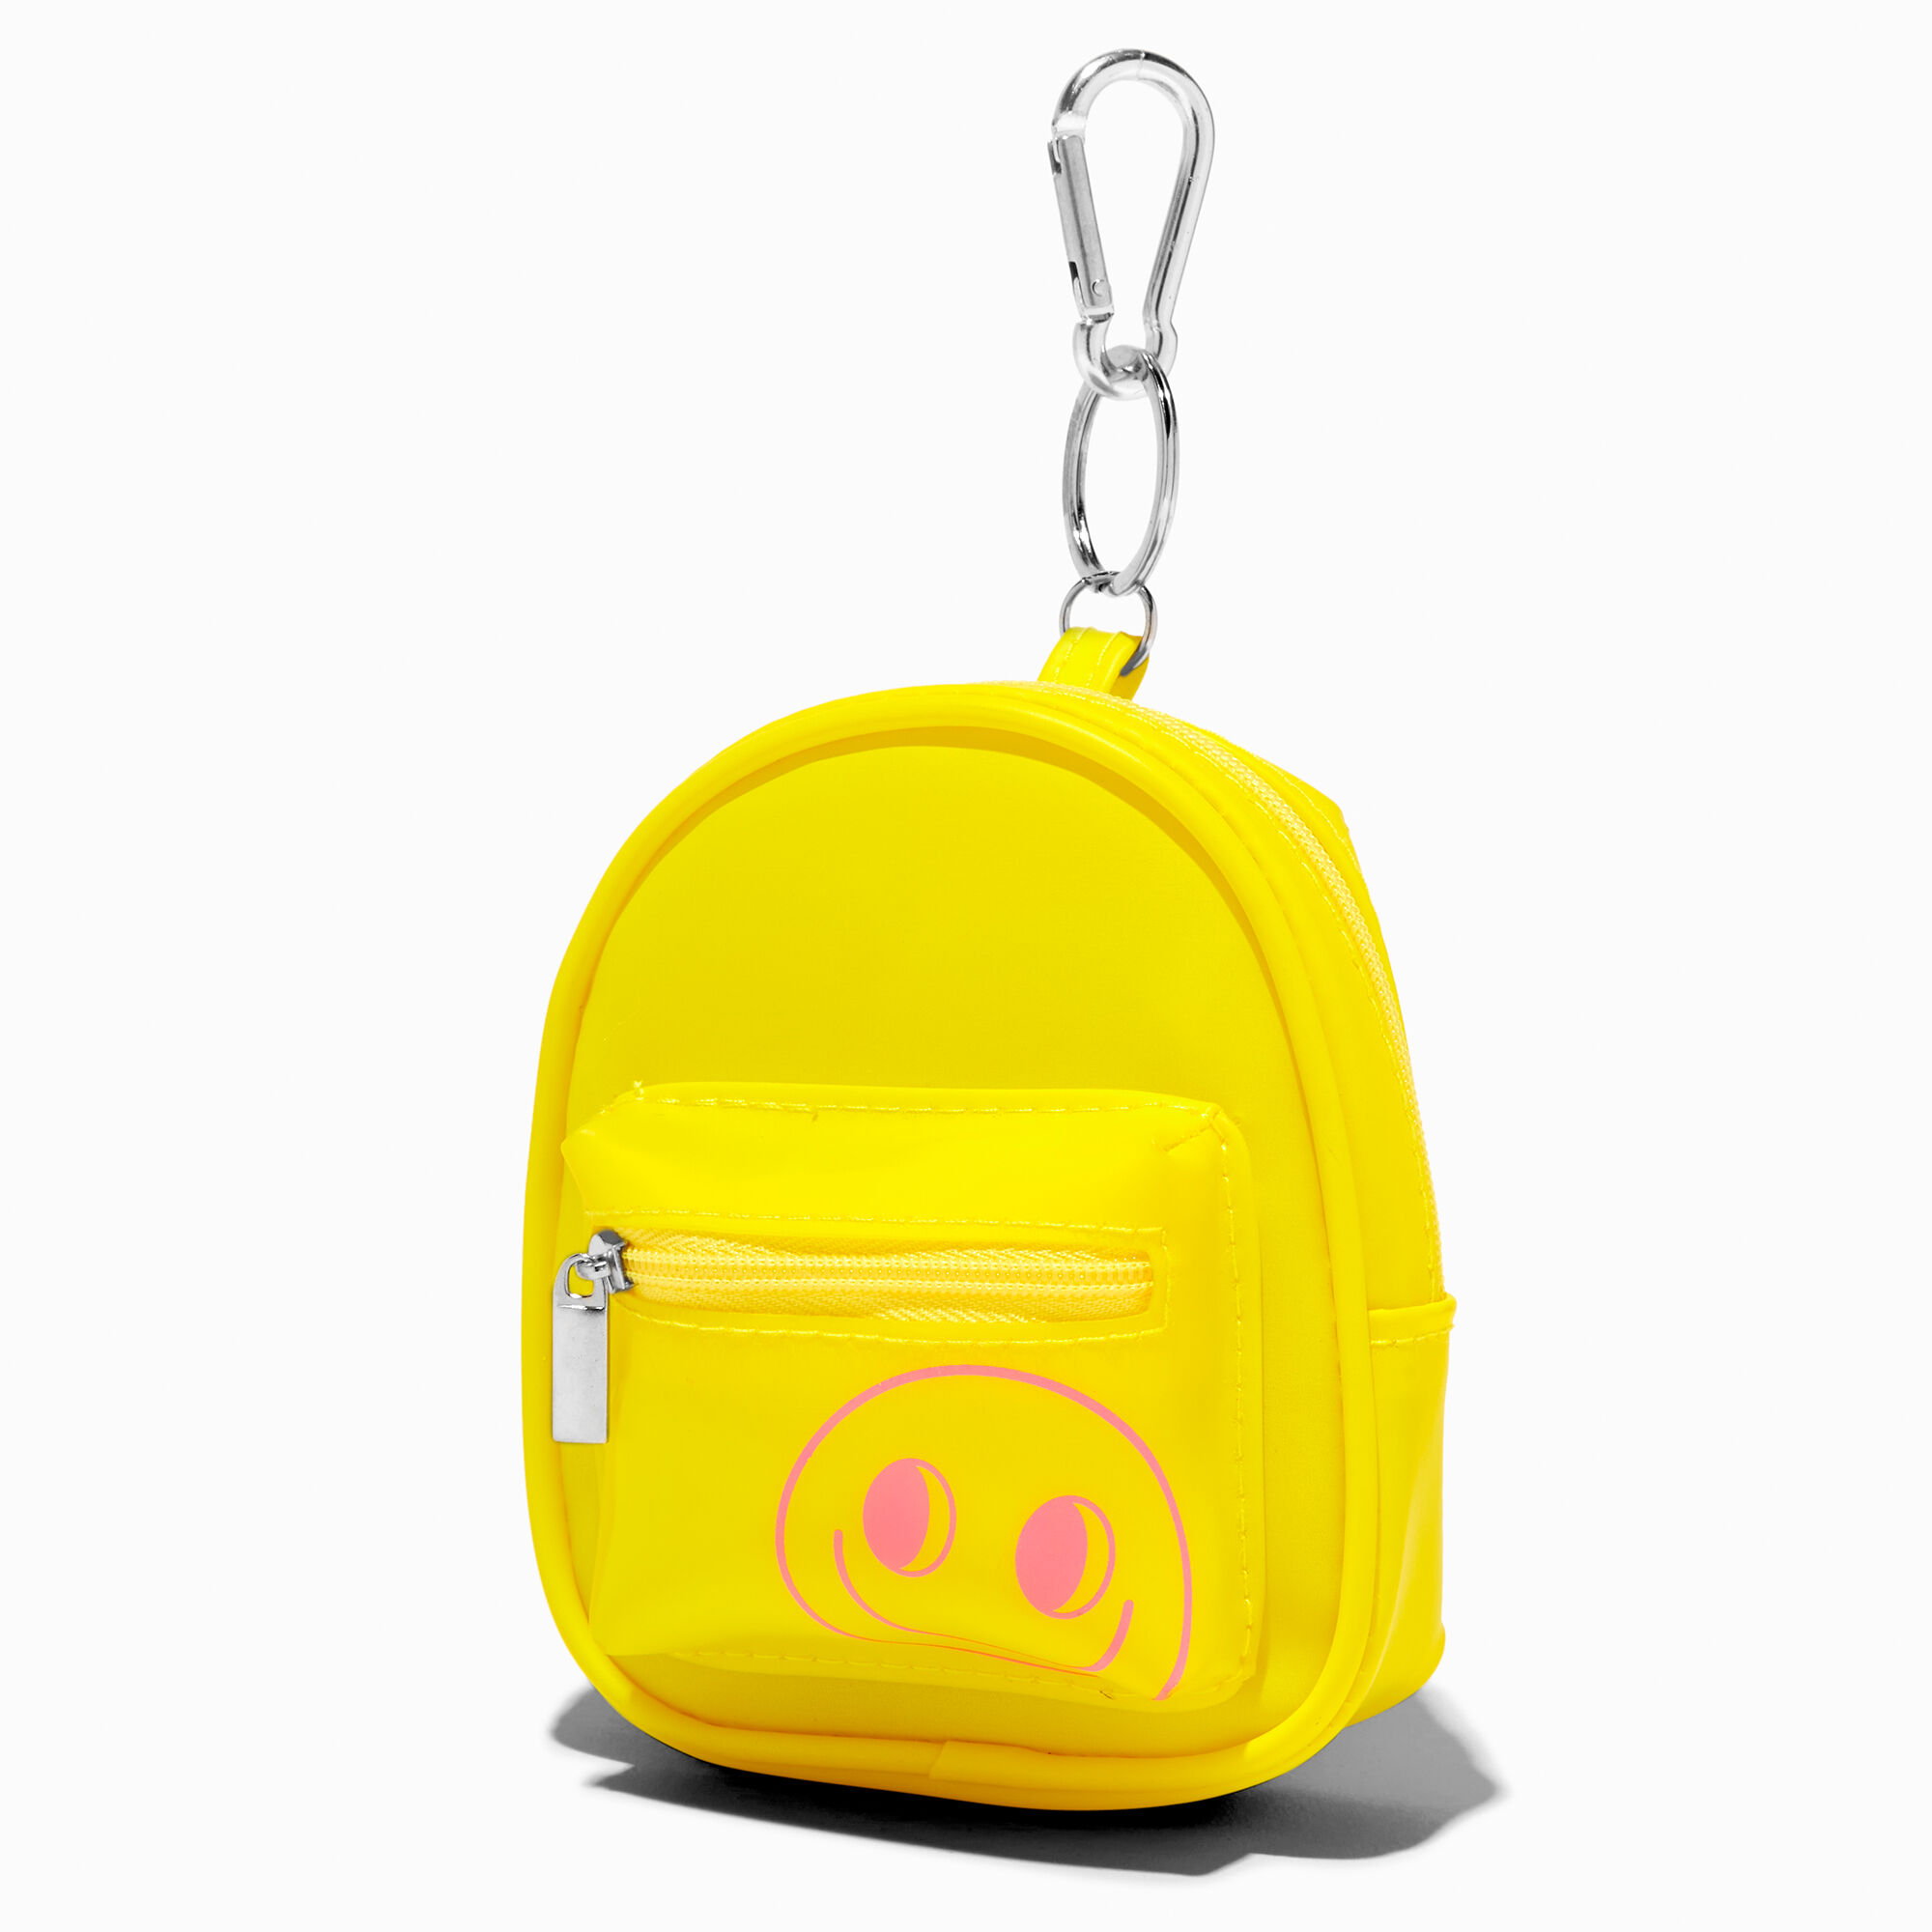 View Claires Happy Face Mini Backpack Keychain Yellow information